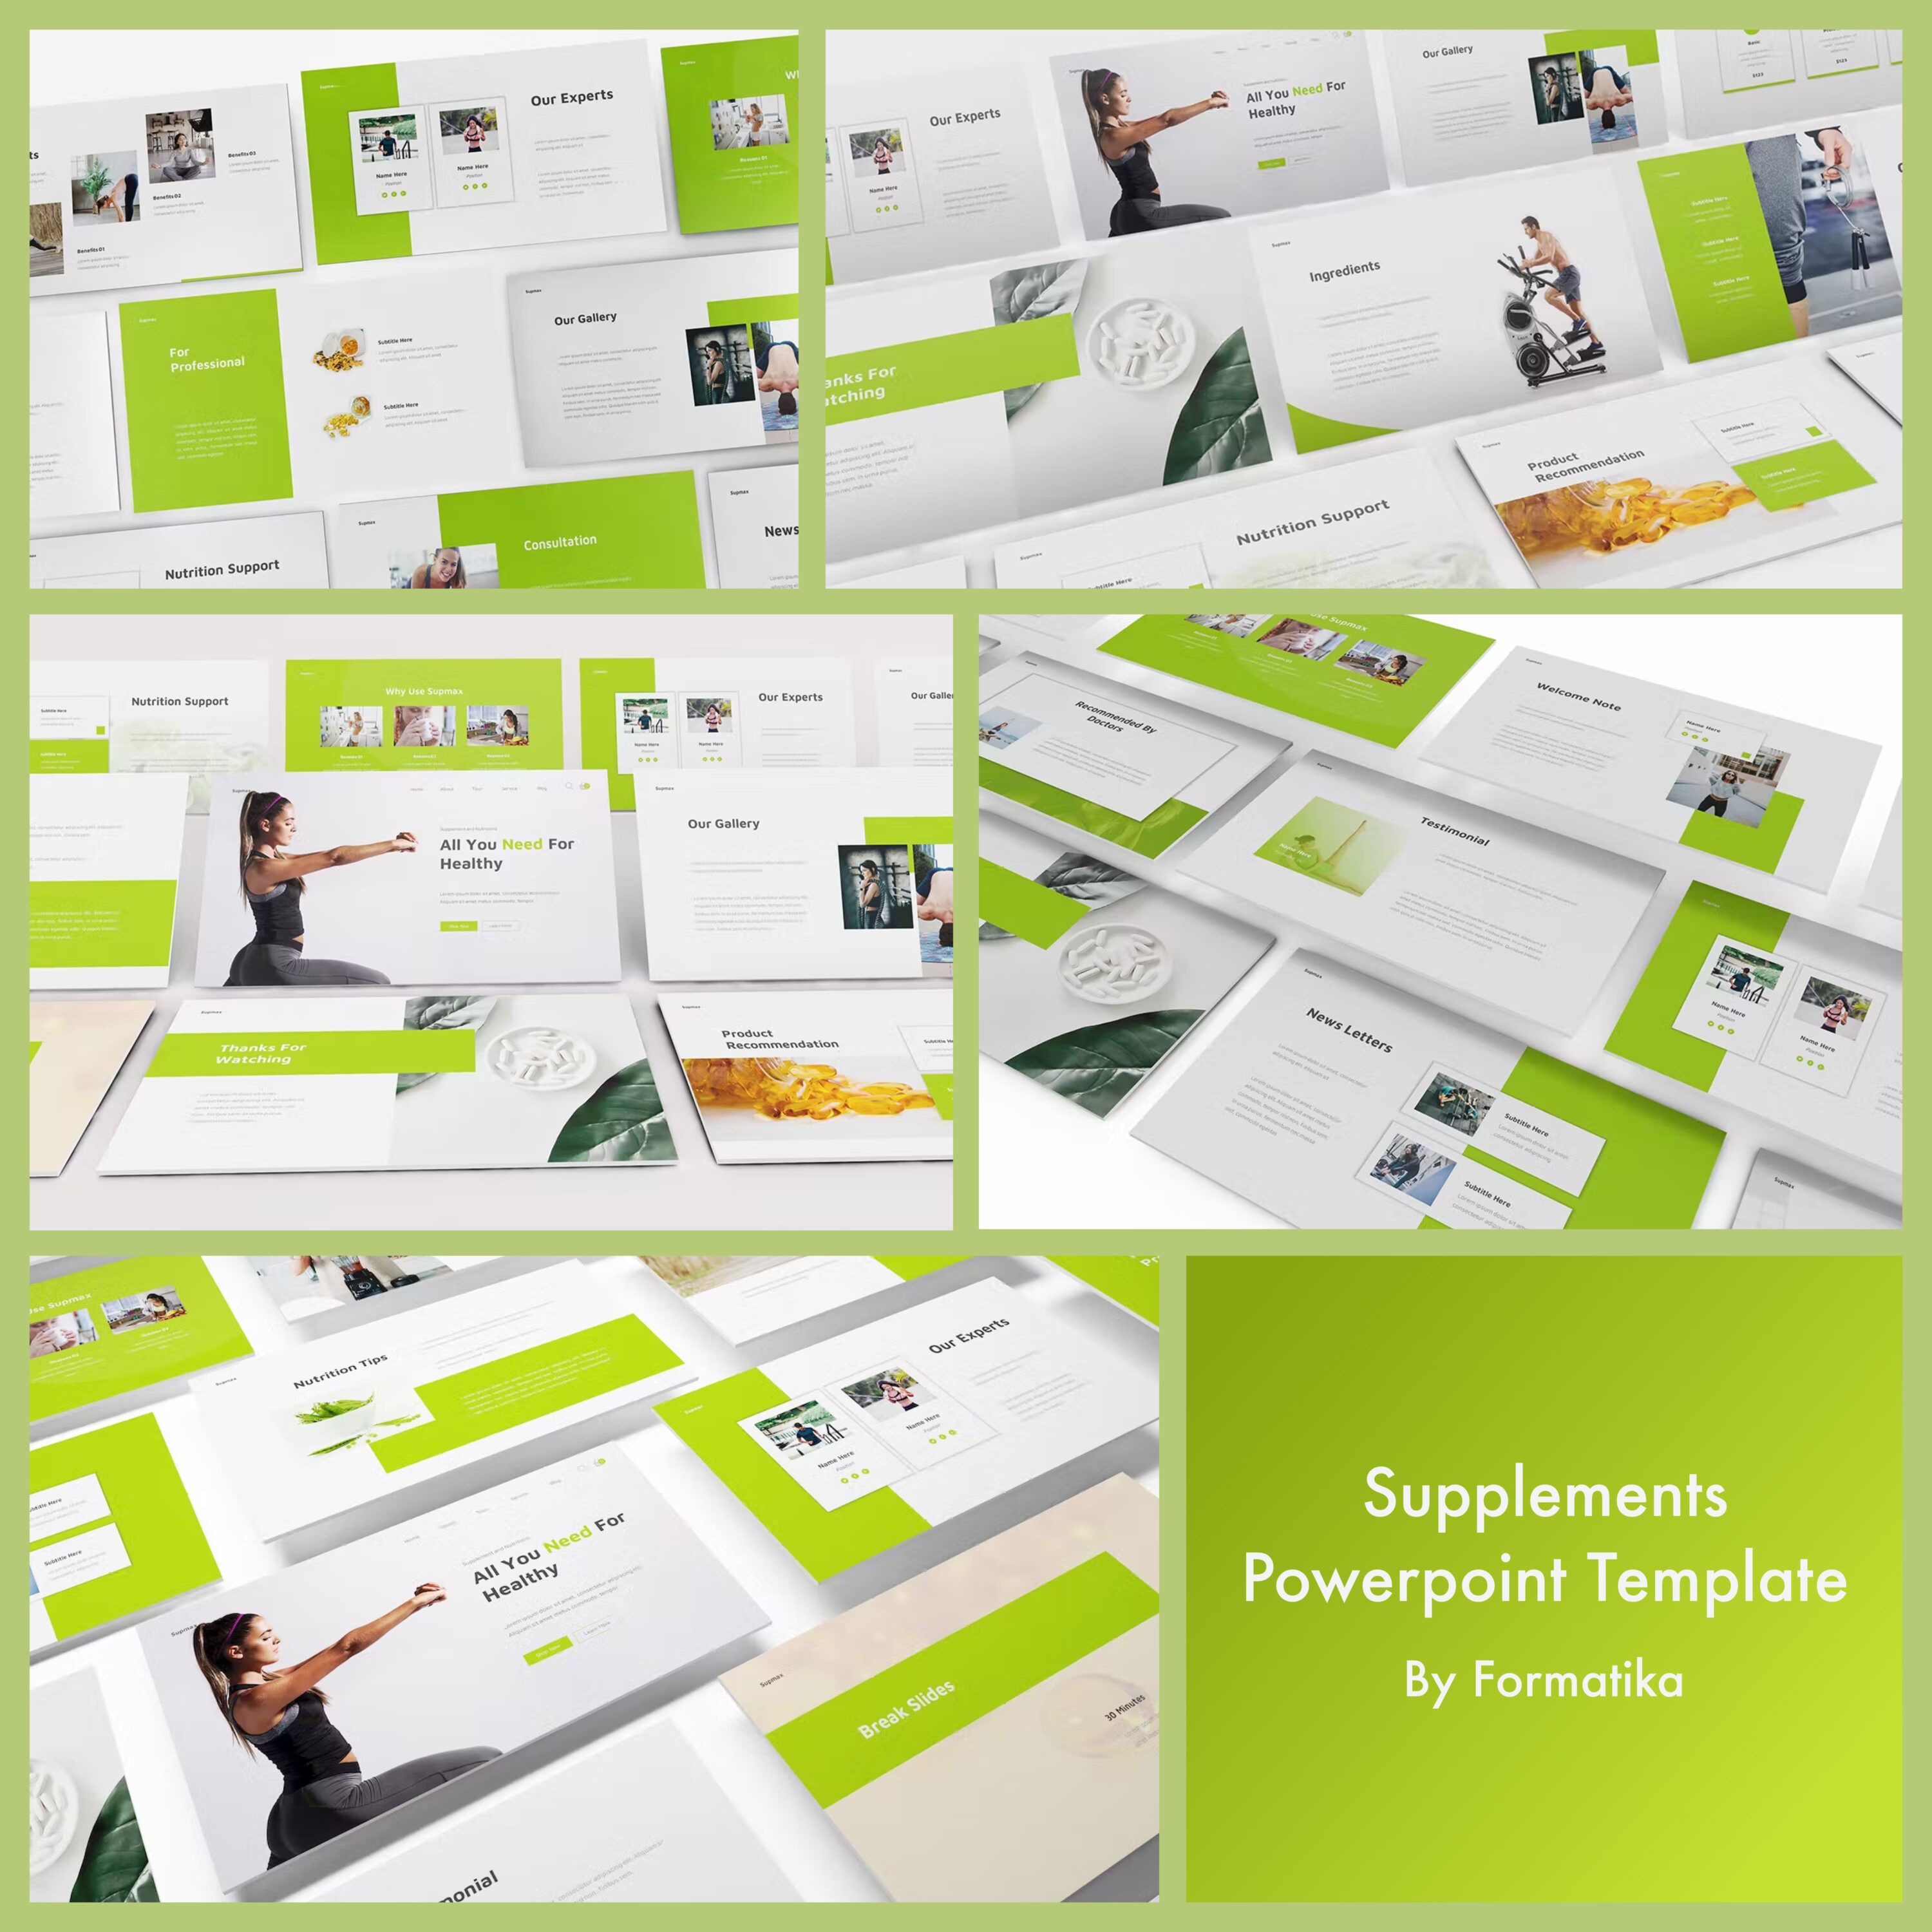 Supplements Powerpoint Template - main image preview.